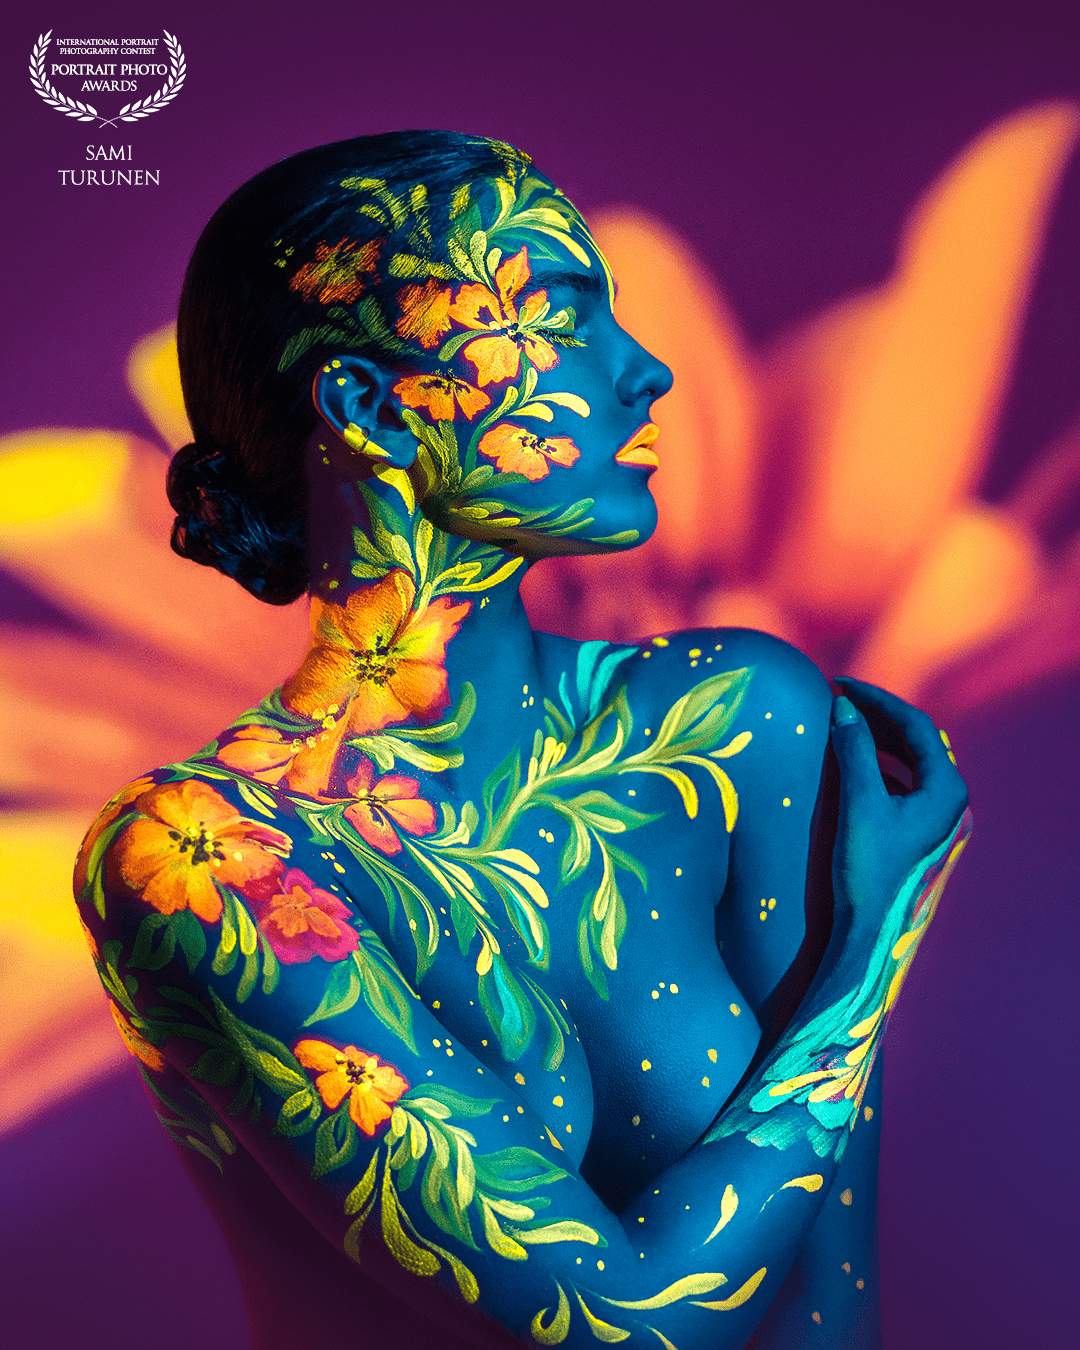 Human Nature is a creation of wonderful team work with model Oona Antila and body painter Riina Laine. A frame is shot with a UV lights and video background projection.